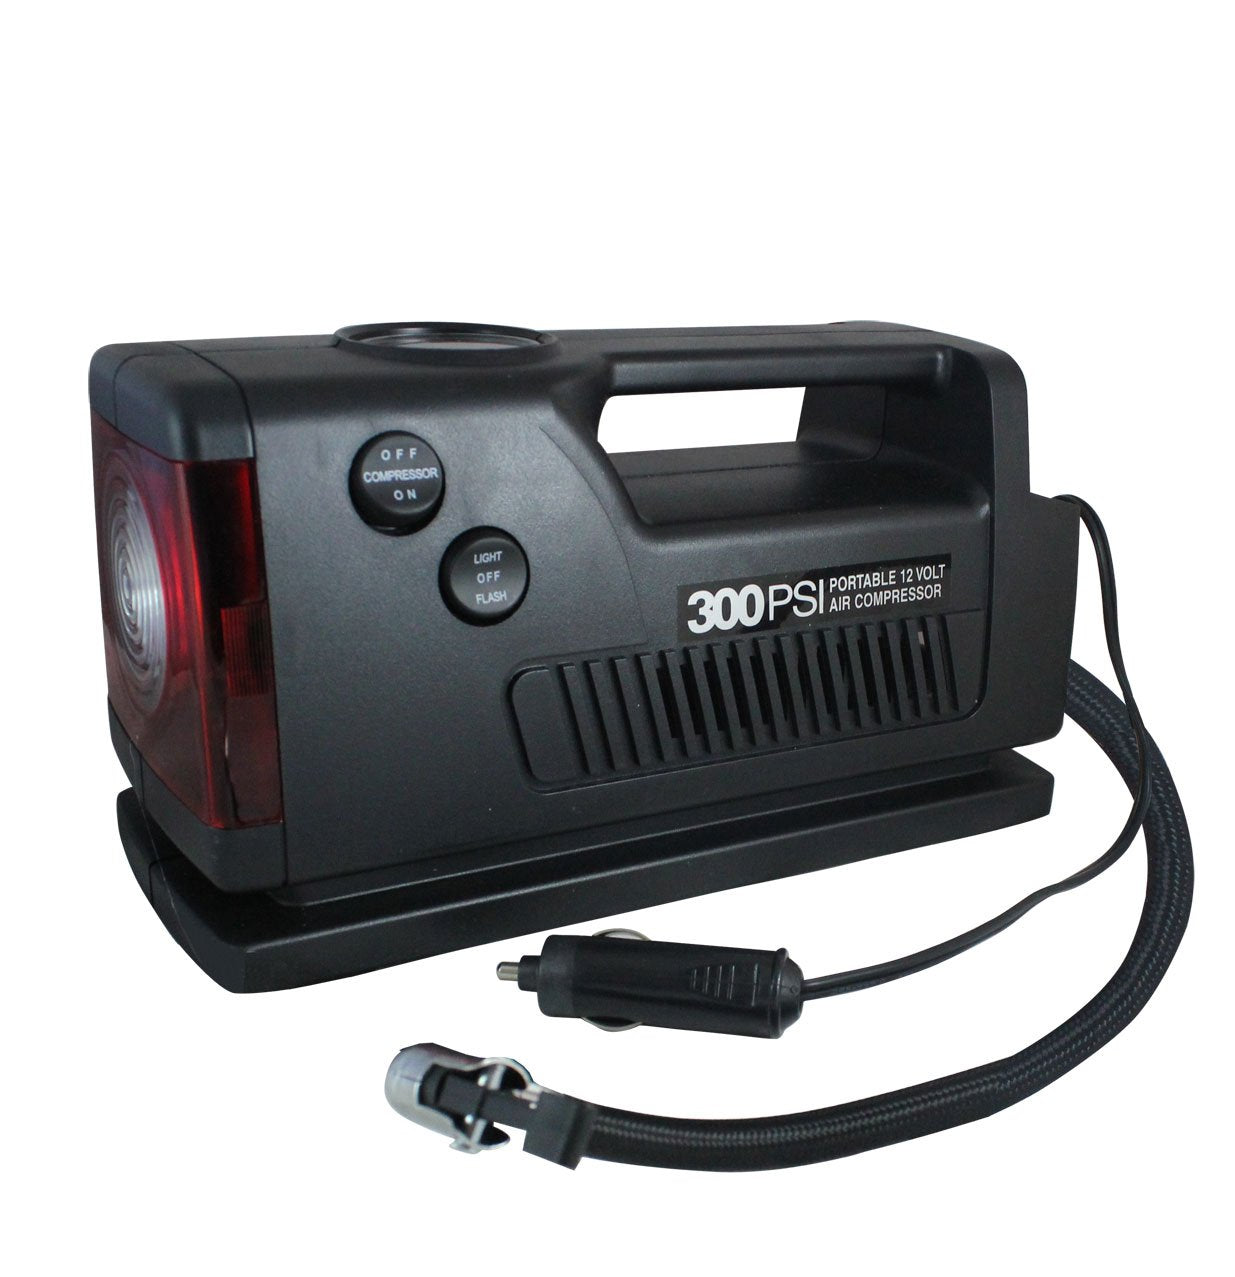 Coido 3326 Car Tyre Inflator with Torch, Emergency Flasher and 300 PSI Gauge